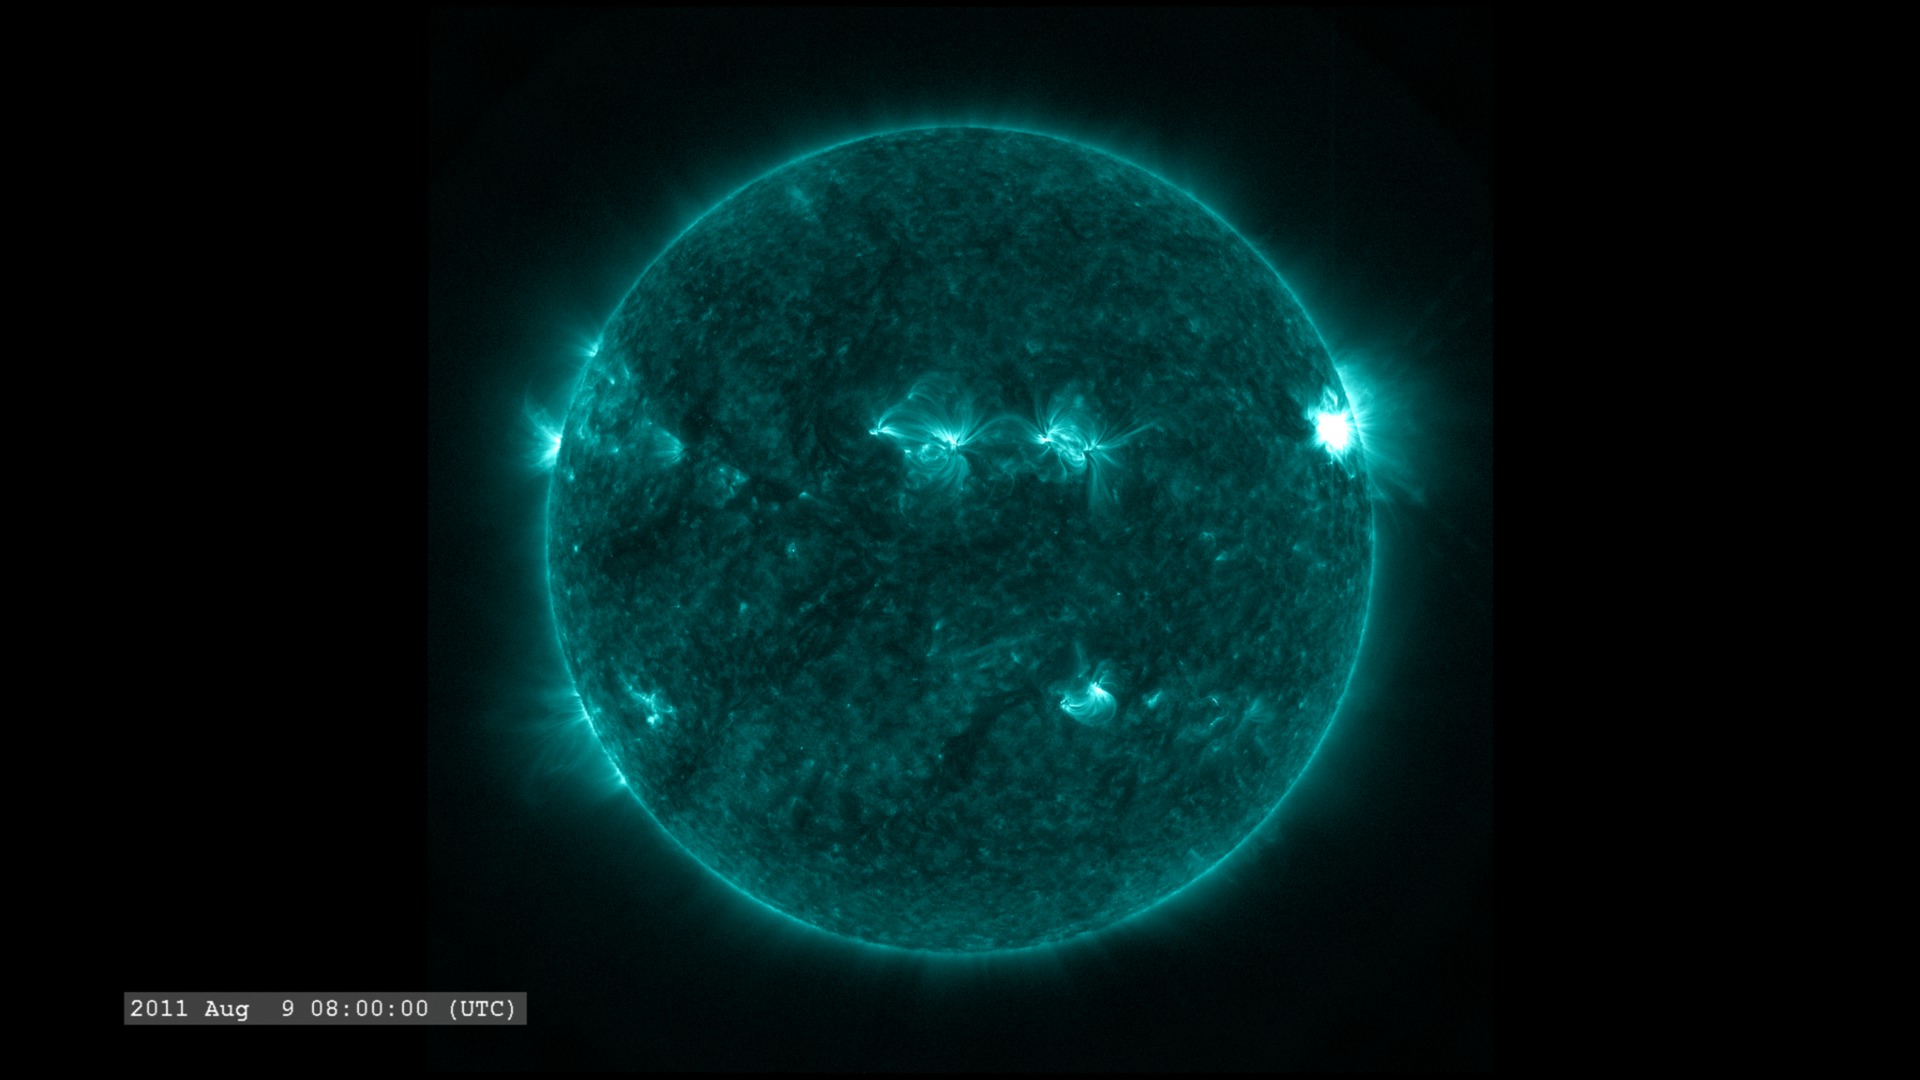 The X6.9 flare as seen by SDO/AIA in 13.1nm filter.